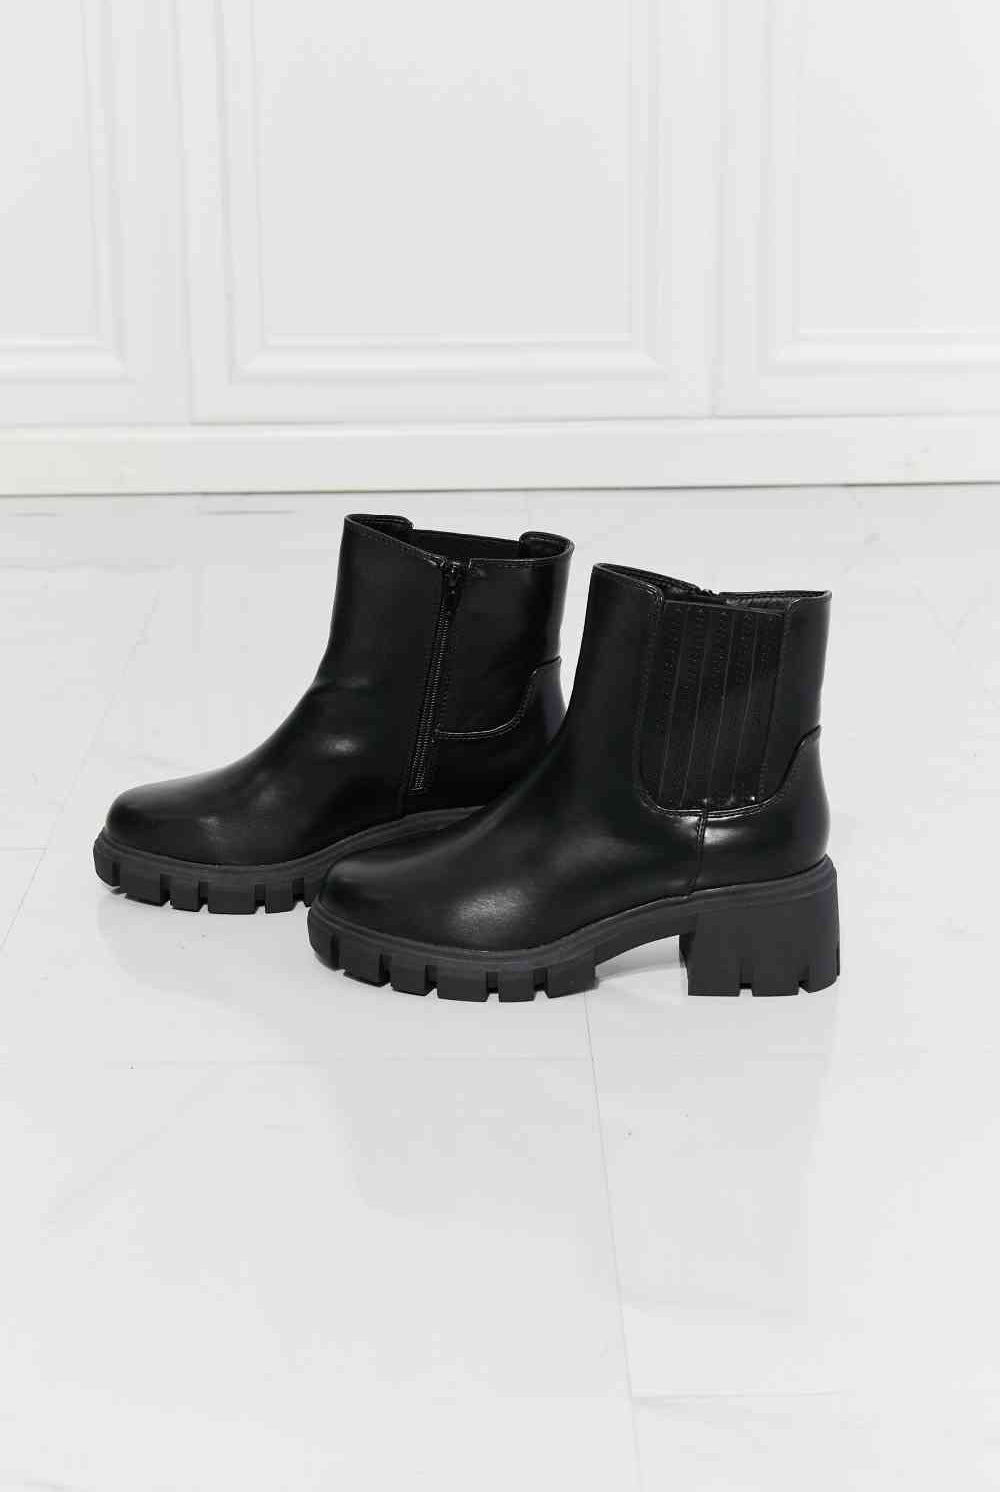 Lavender MMShoes What It Takes Lug Sole Chelsea Boots in Black Shoes